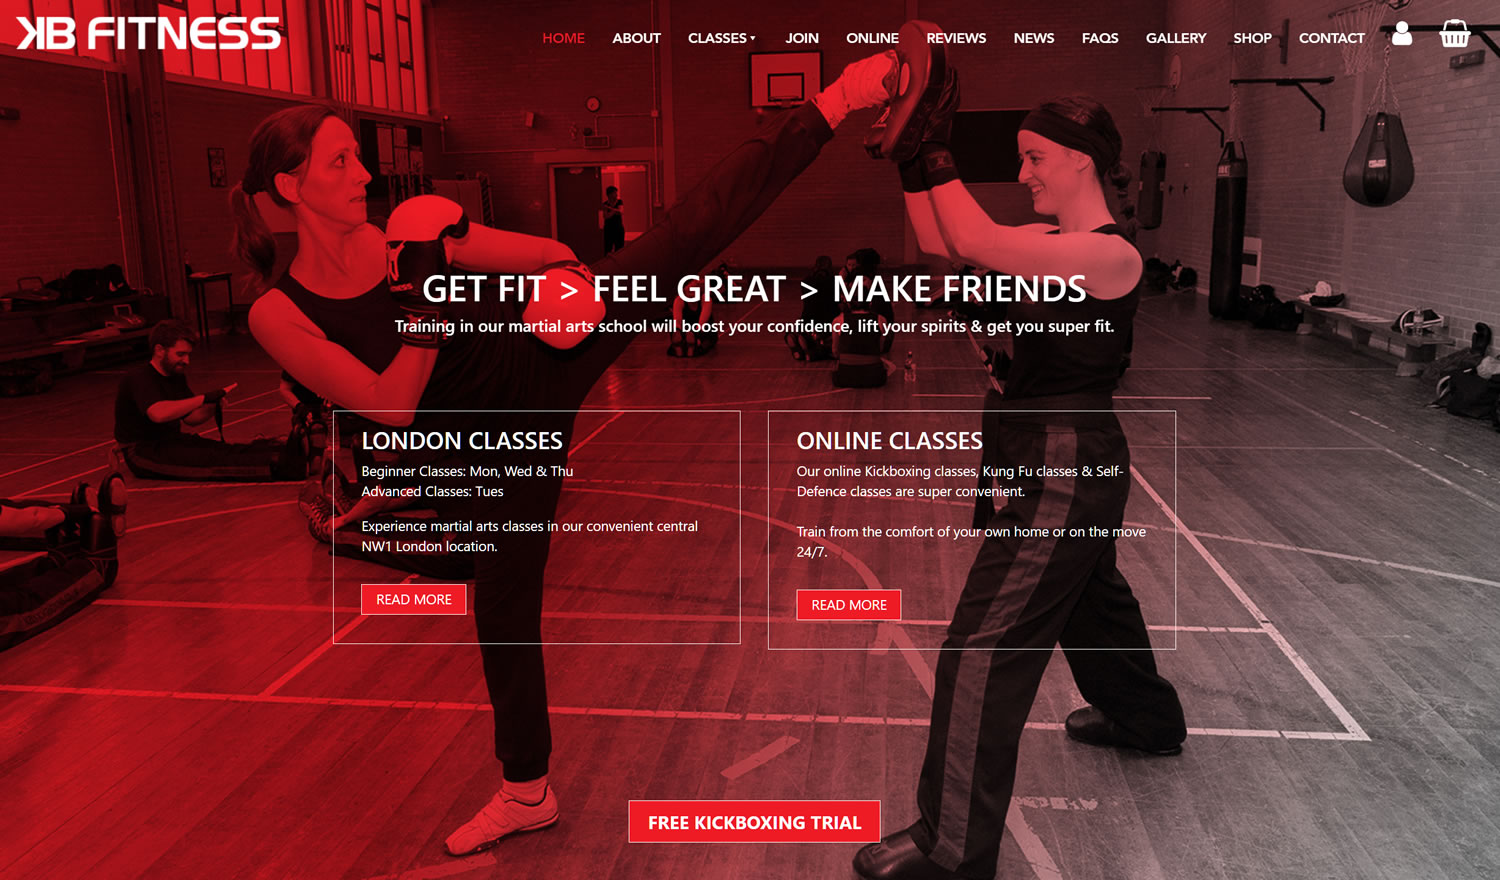 SEO services provided to Martial arts school